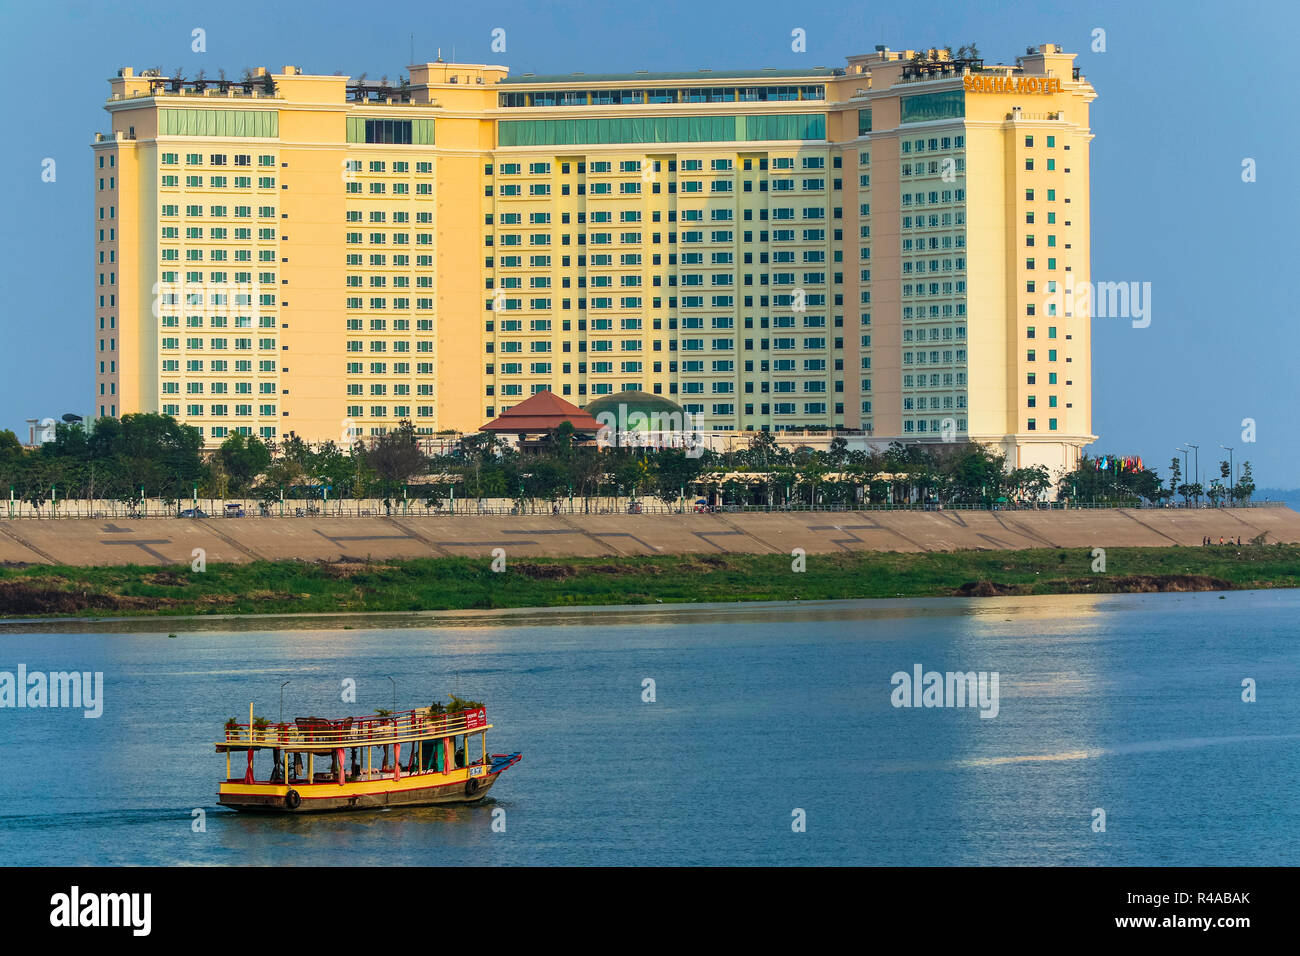 Sunset cruise boat & Sokha hotel at the confluence of the Tonle Sap & Mekong rivers; central riverfront, Phnom Penh, Cambodia Stock Photo